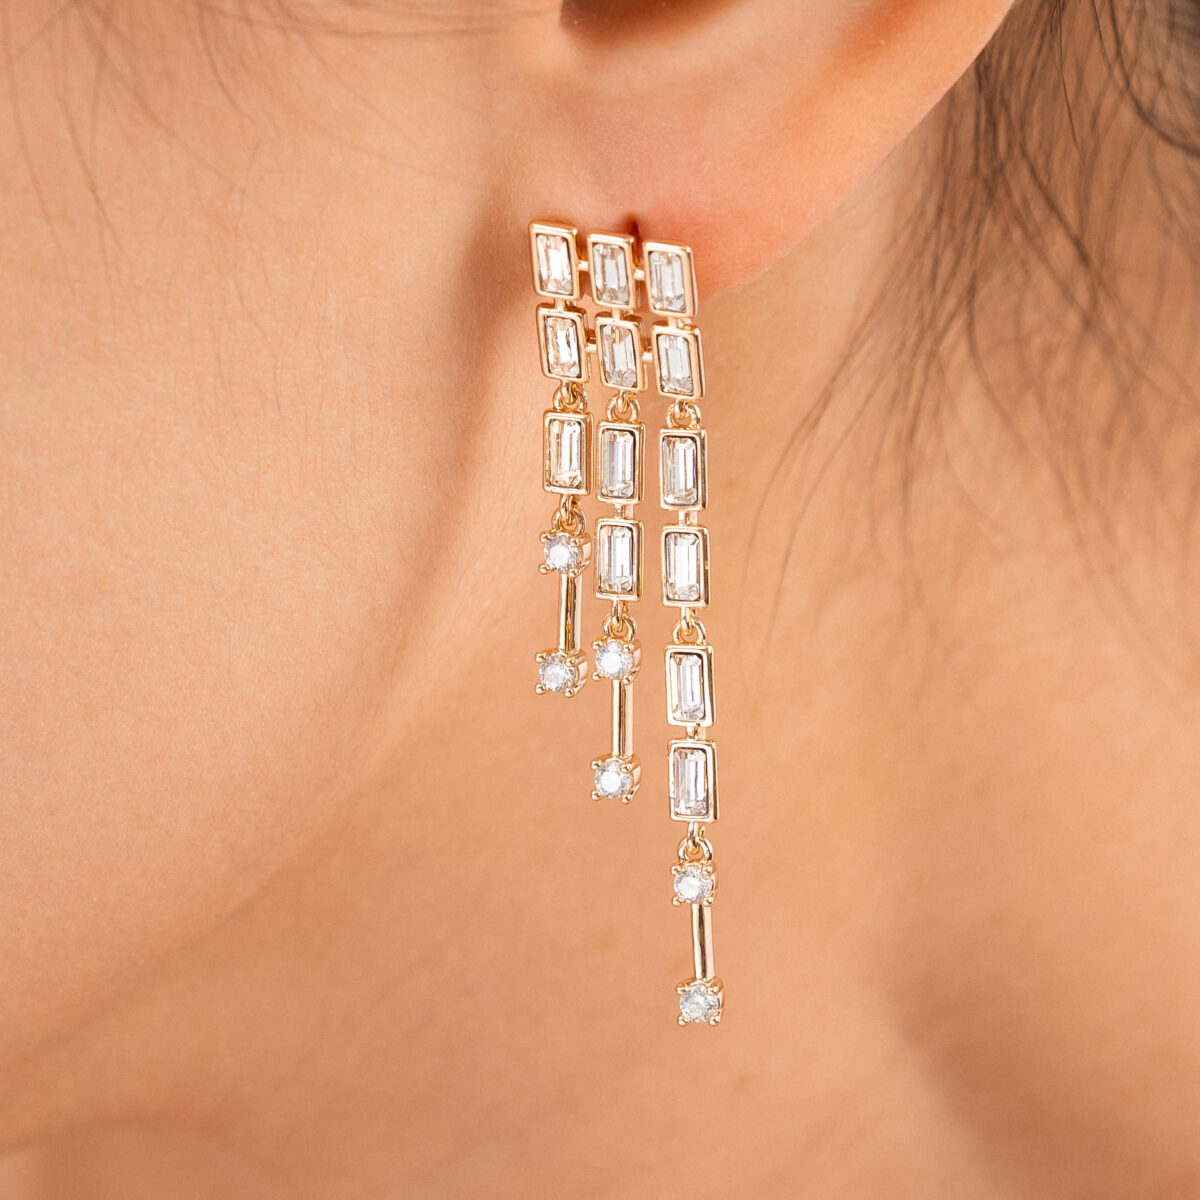 https://m.clubbella.co/product/articulated-14k-gold-plated-crystal-fall-earrings/ CRYSTAL FALL EARRINGS (3)